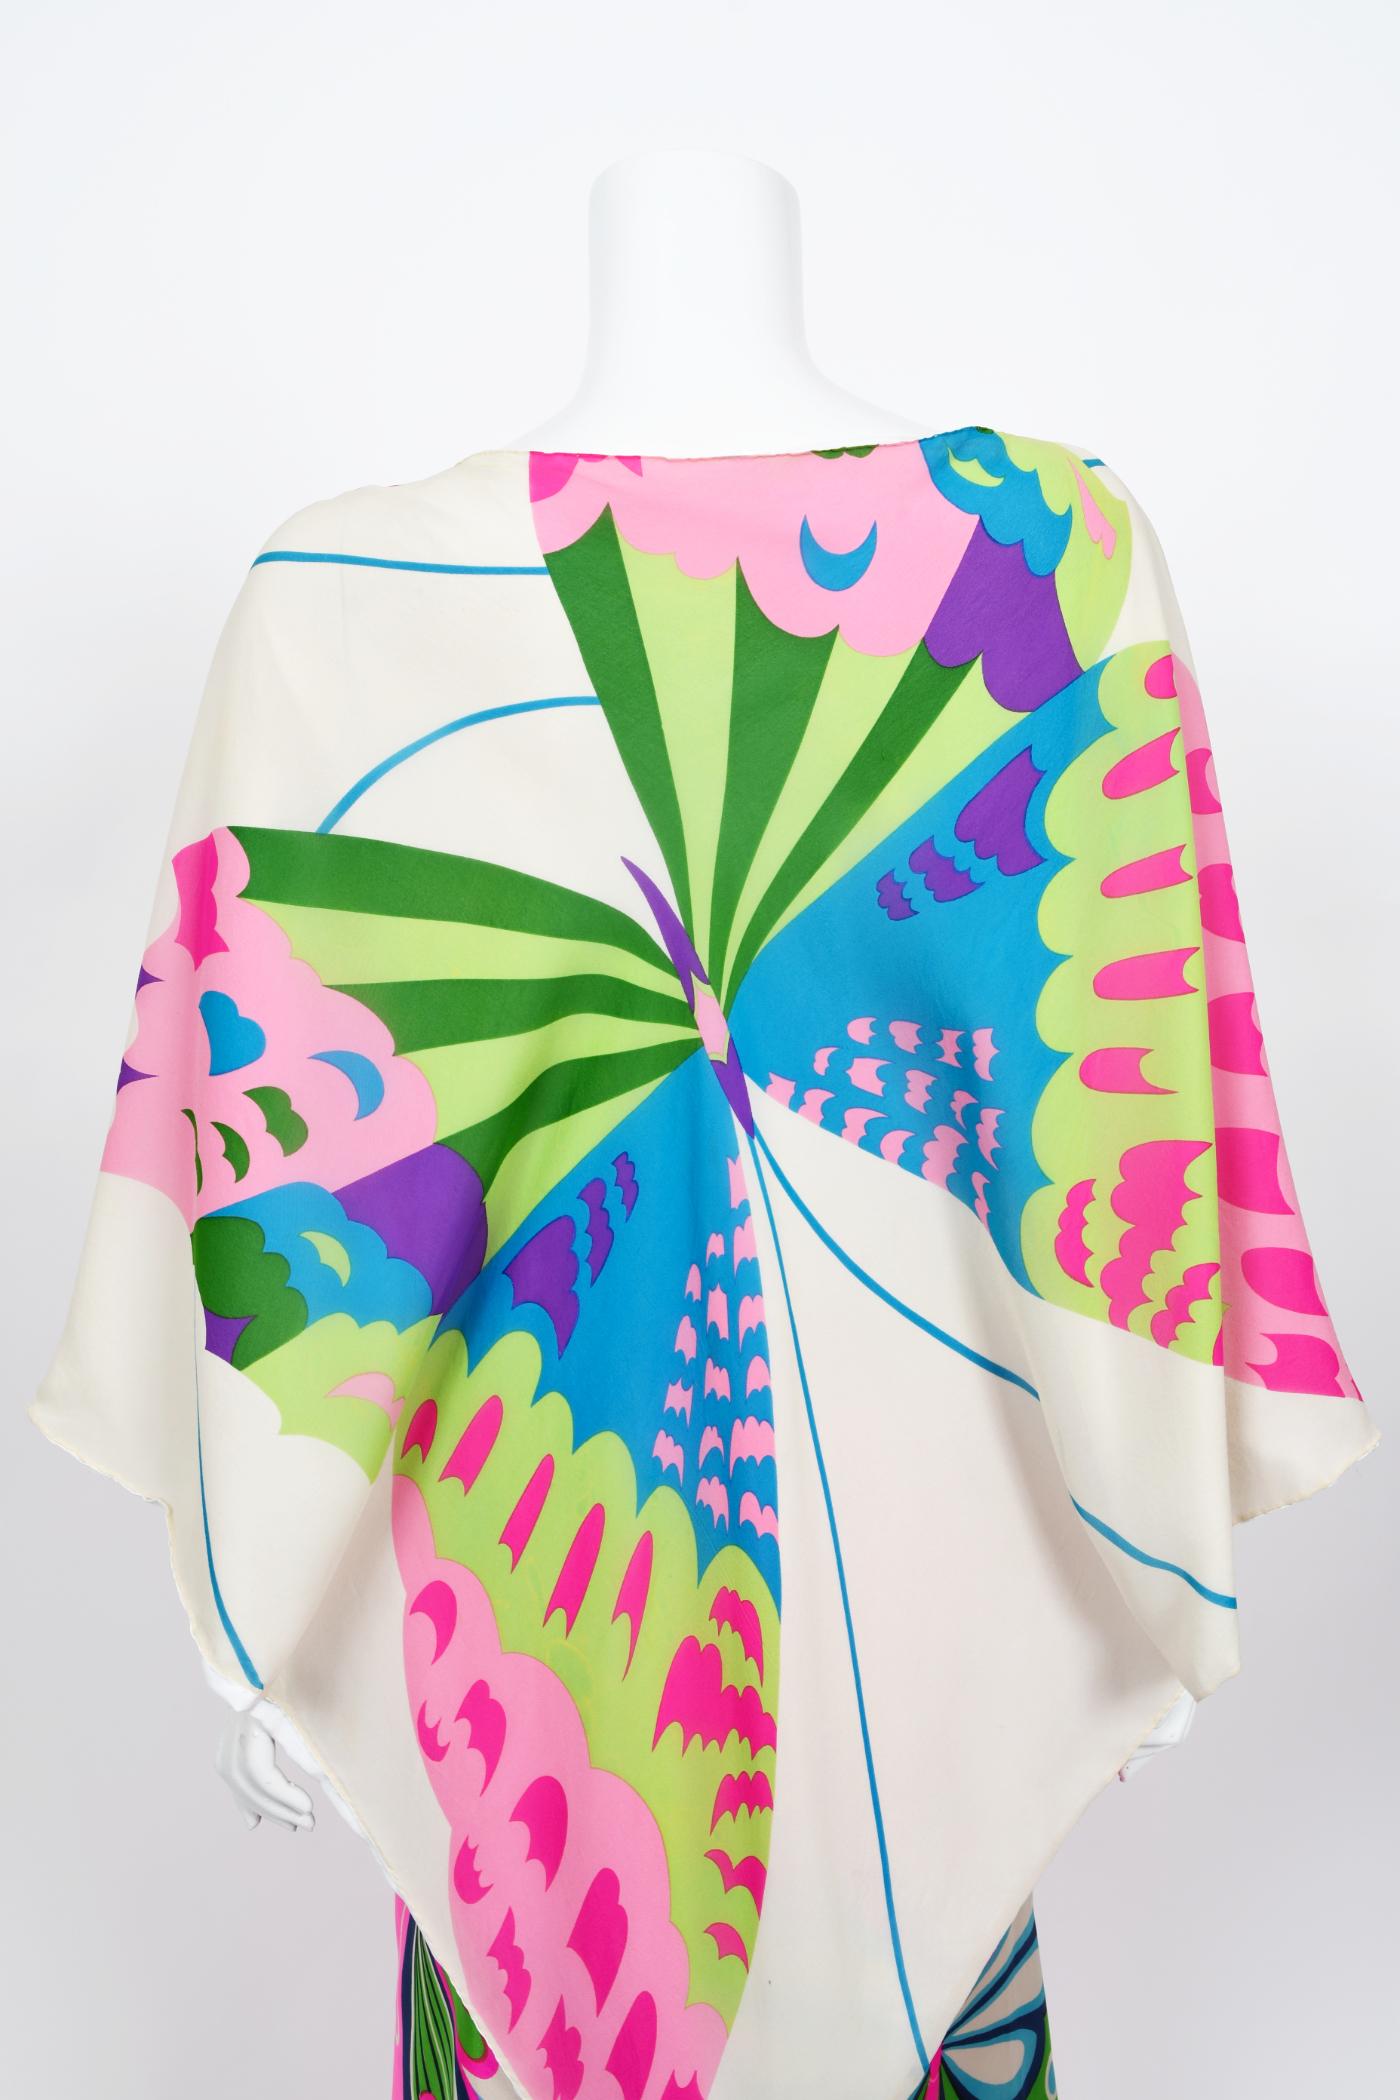 Ultra chic and instantly recognizable caftan blouse pantsuit from Hanae Mori's 1967 spring/summer collection. Whilst on a Paris holiday in 1960, Mori had a fateful fitting with Coco Chanel. She claimed this meeting changed her life and she